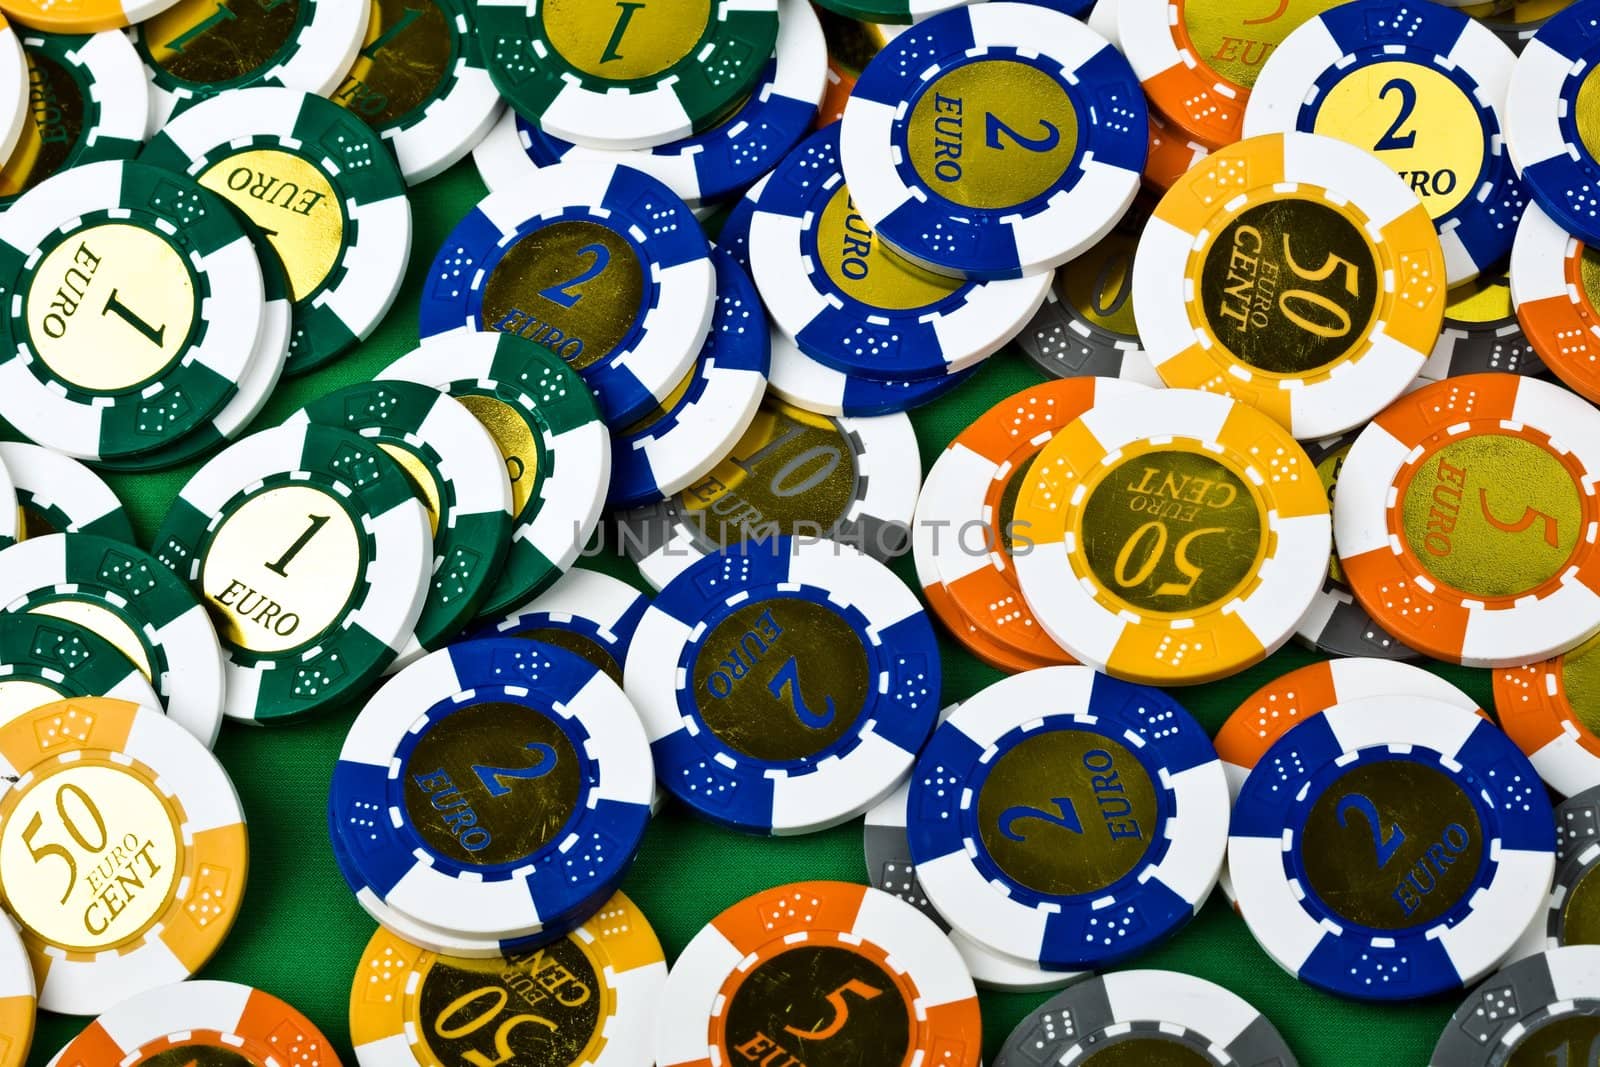 An image of a great amount of poker chips